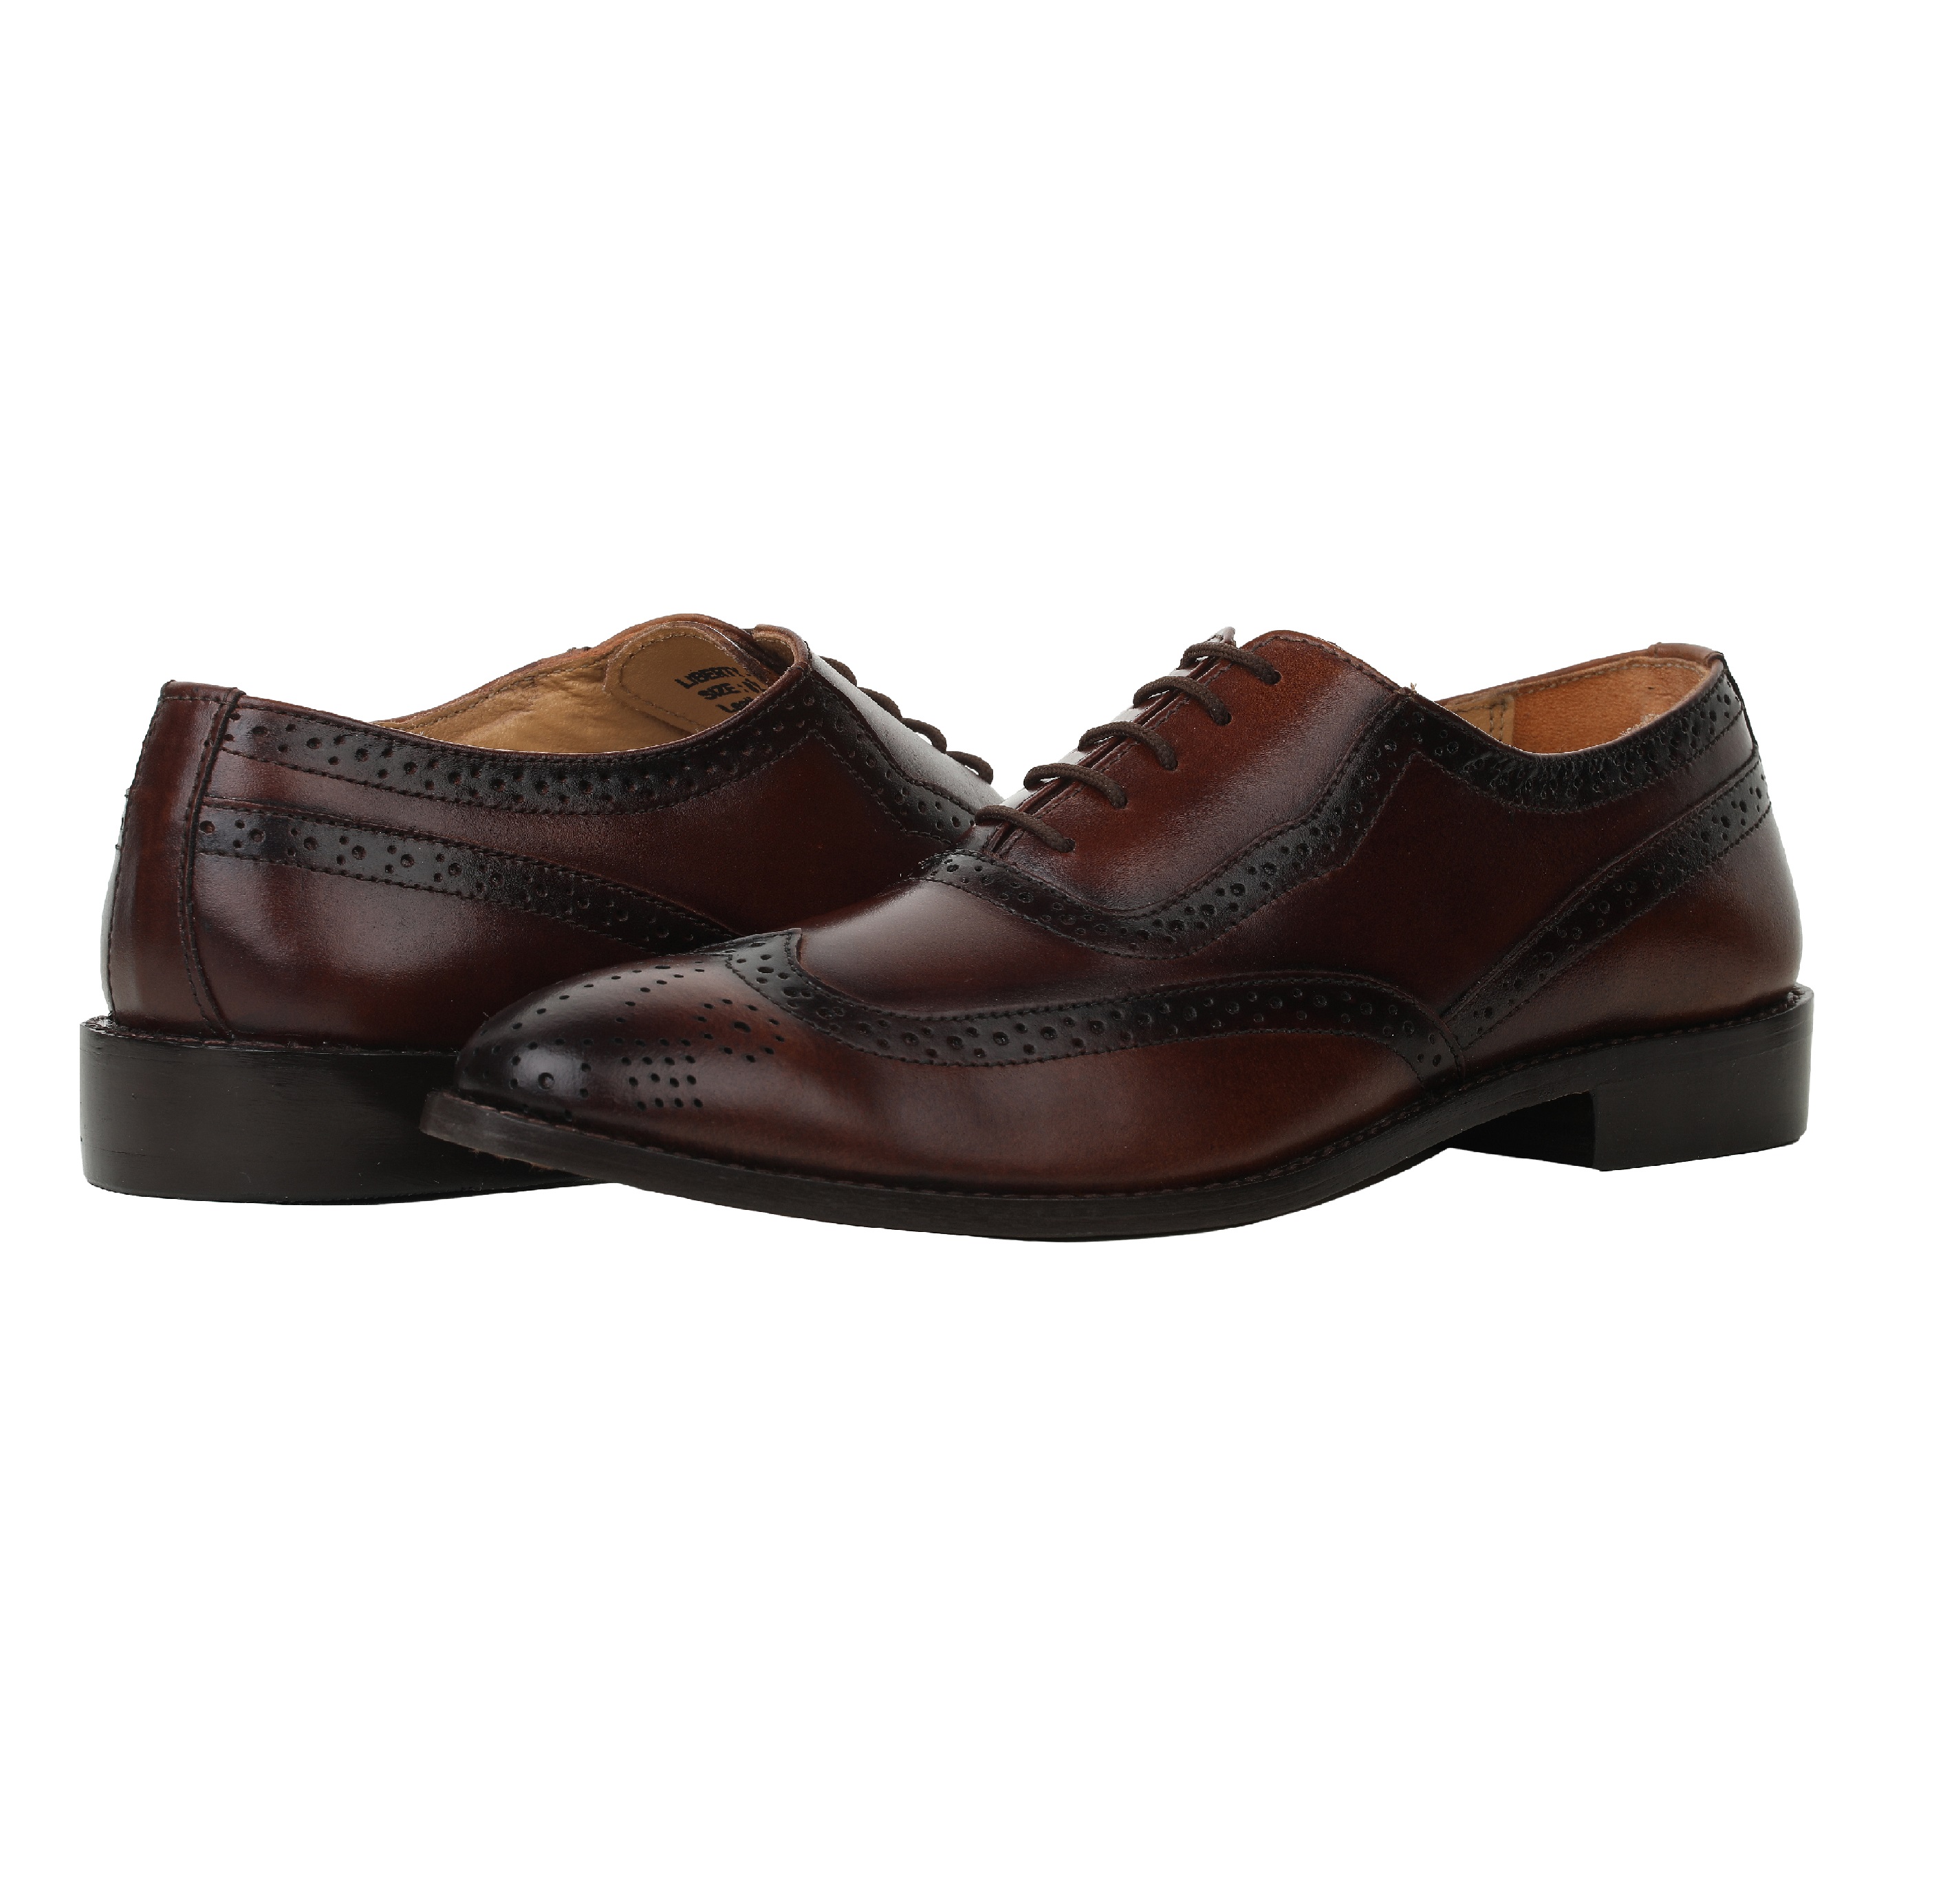 liberty men's leather formal shoes